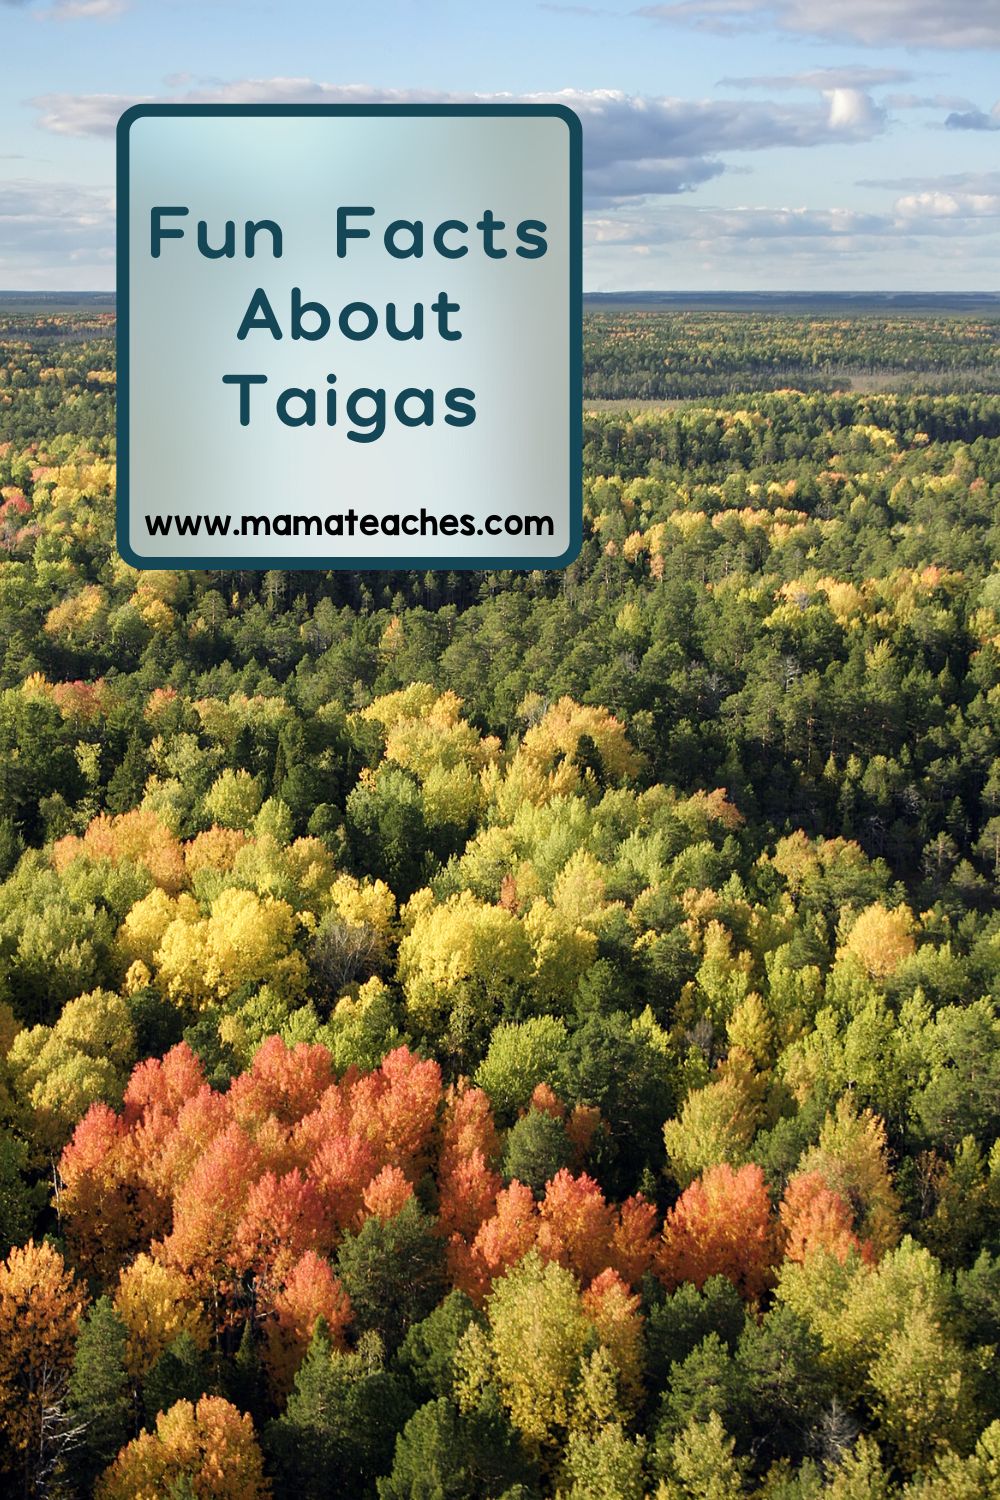 Fun Facts About Taigas